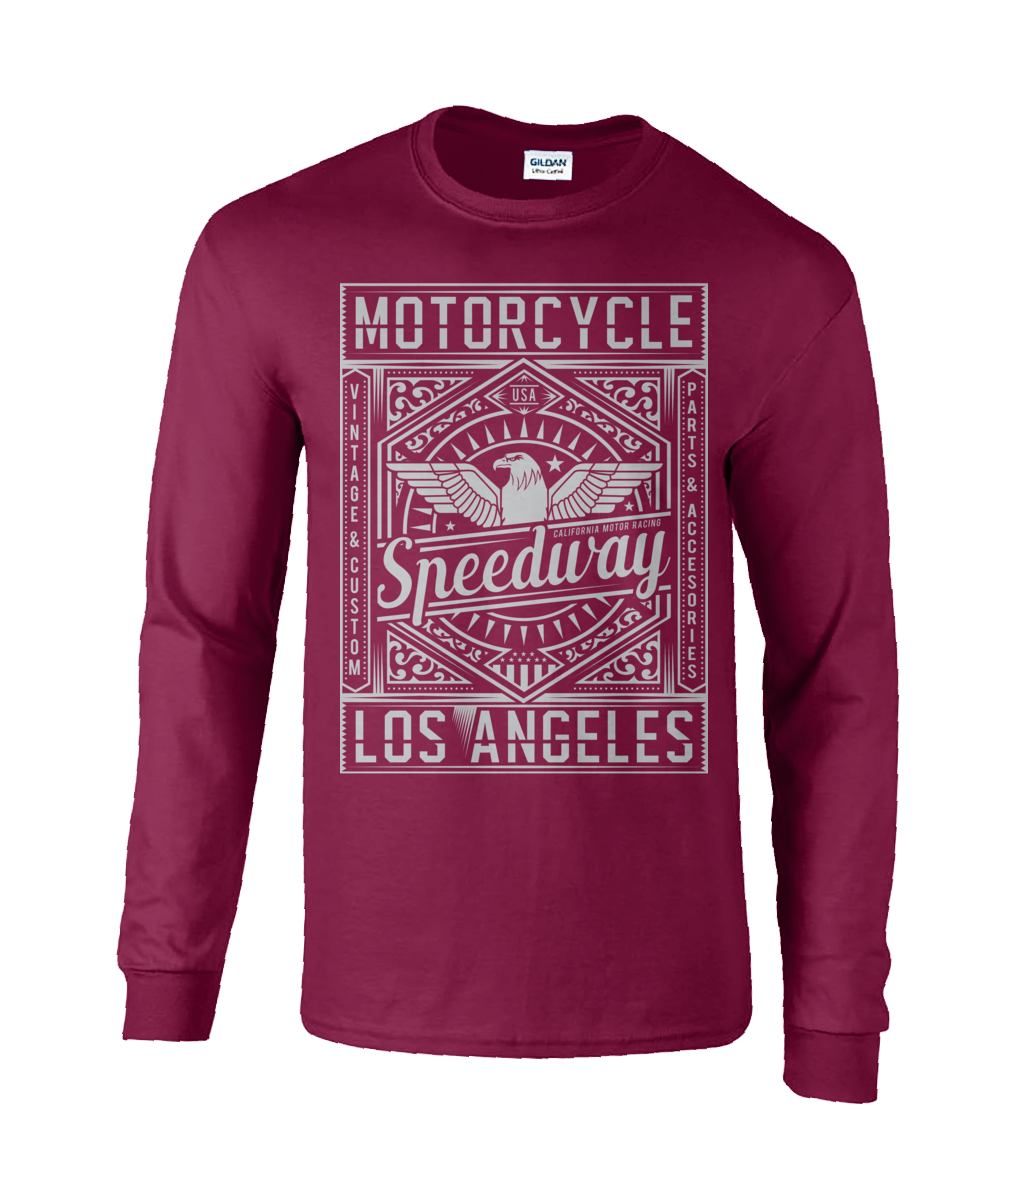 Motorcycle Speedway – Ultra Cotton Long Sleeve T-shirt